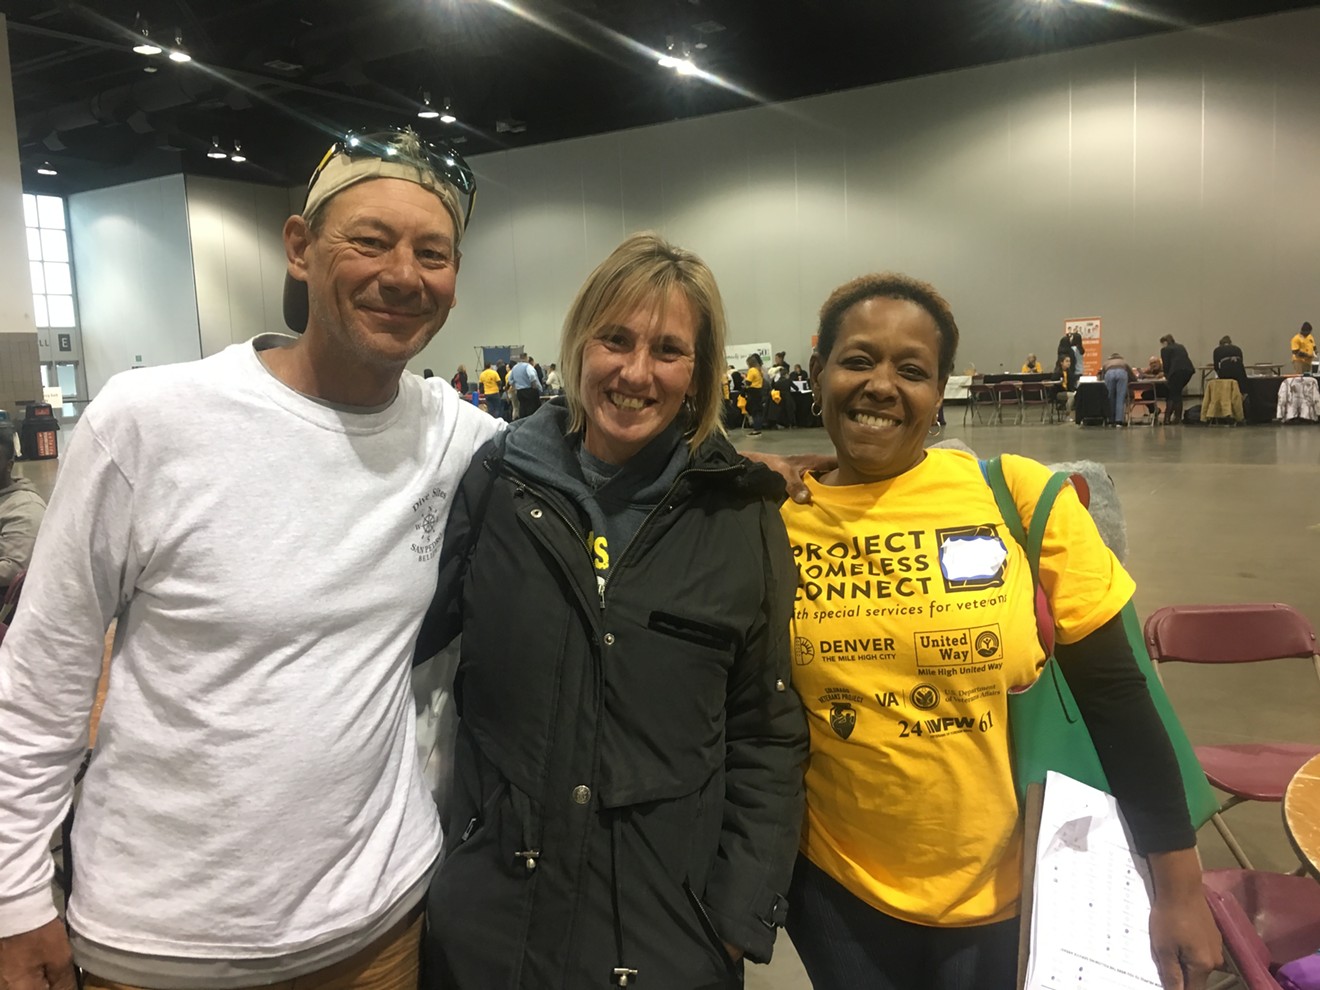 Volunteer Kim (right) stands with the two people she helped navigate services: Robert Harris and Sabrina Lugo.